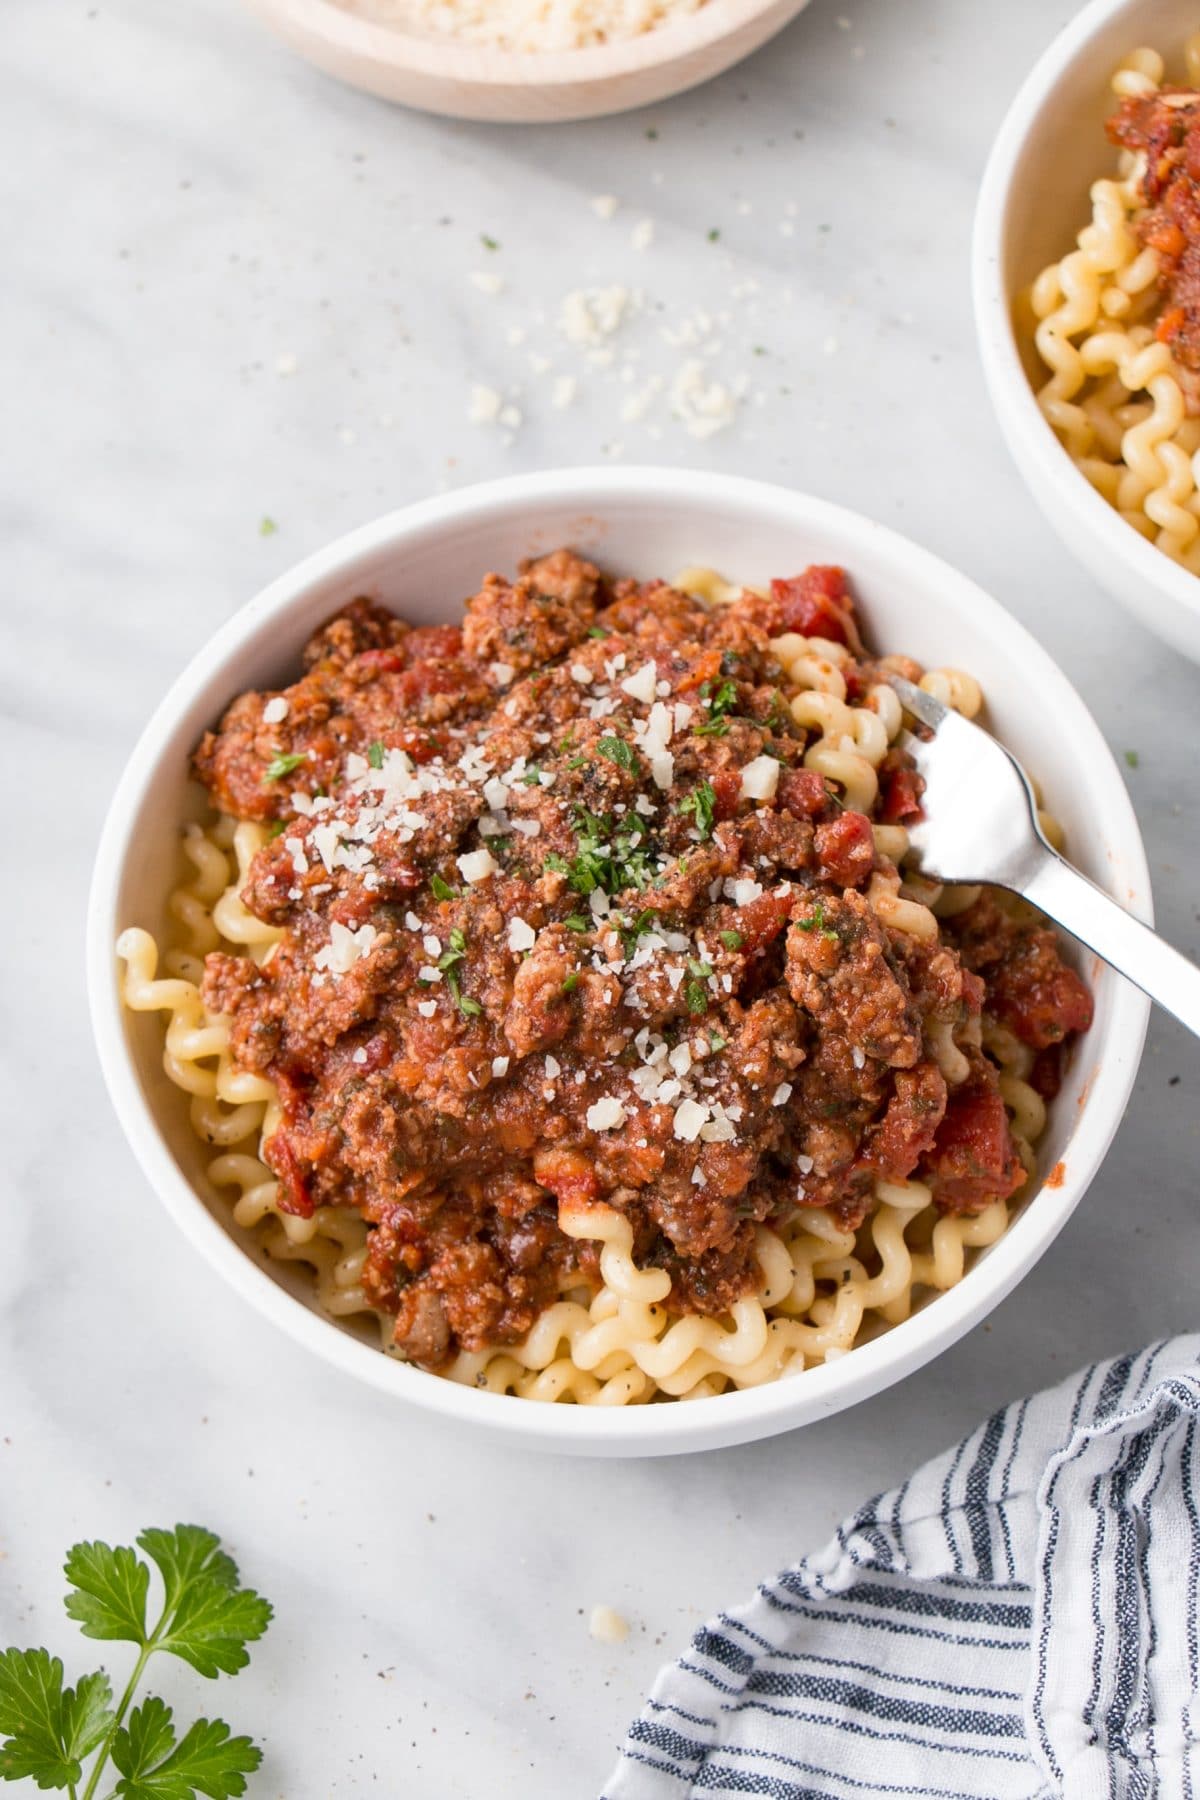 Weekday Ragù is packed with tons of vegetables and flavour! It's perfect for busy days and picky-eaters! Can be made in either a slow cooker or an instant pot! #instantpot #slowcooker #pastasauce #kidfriendly #comfortfood